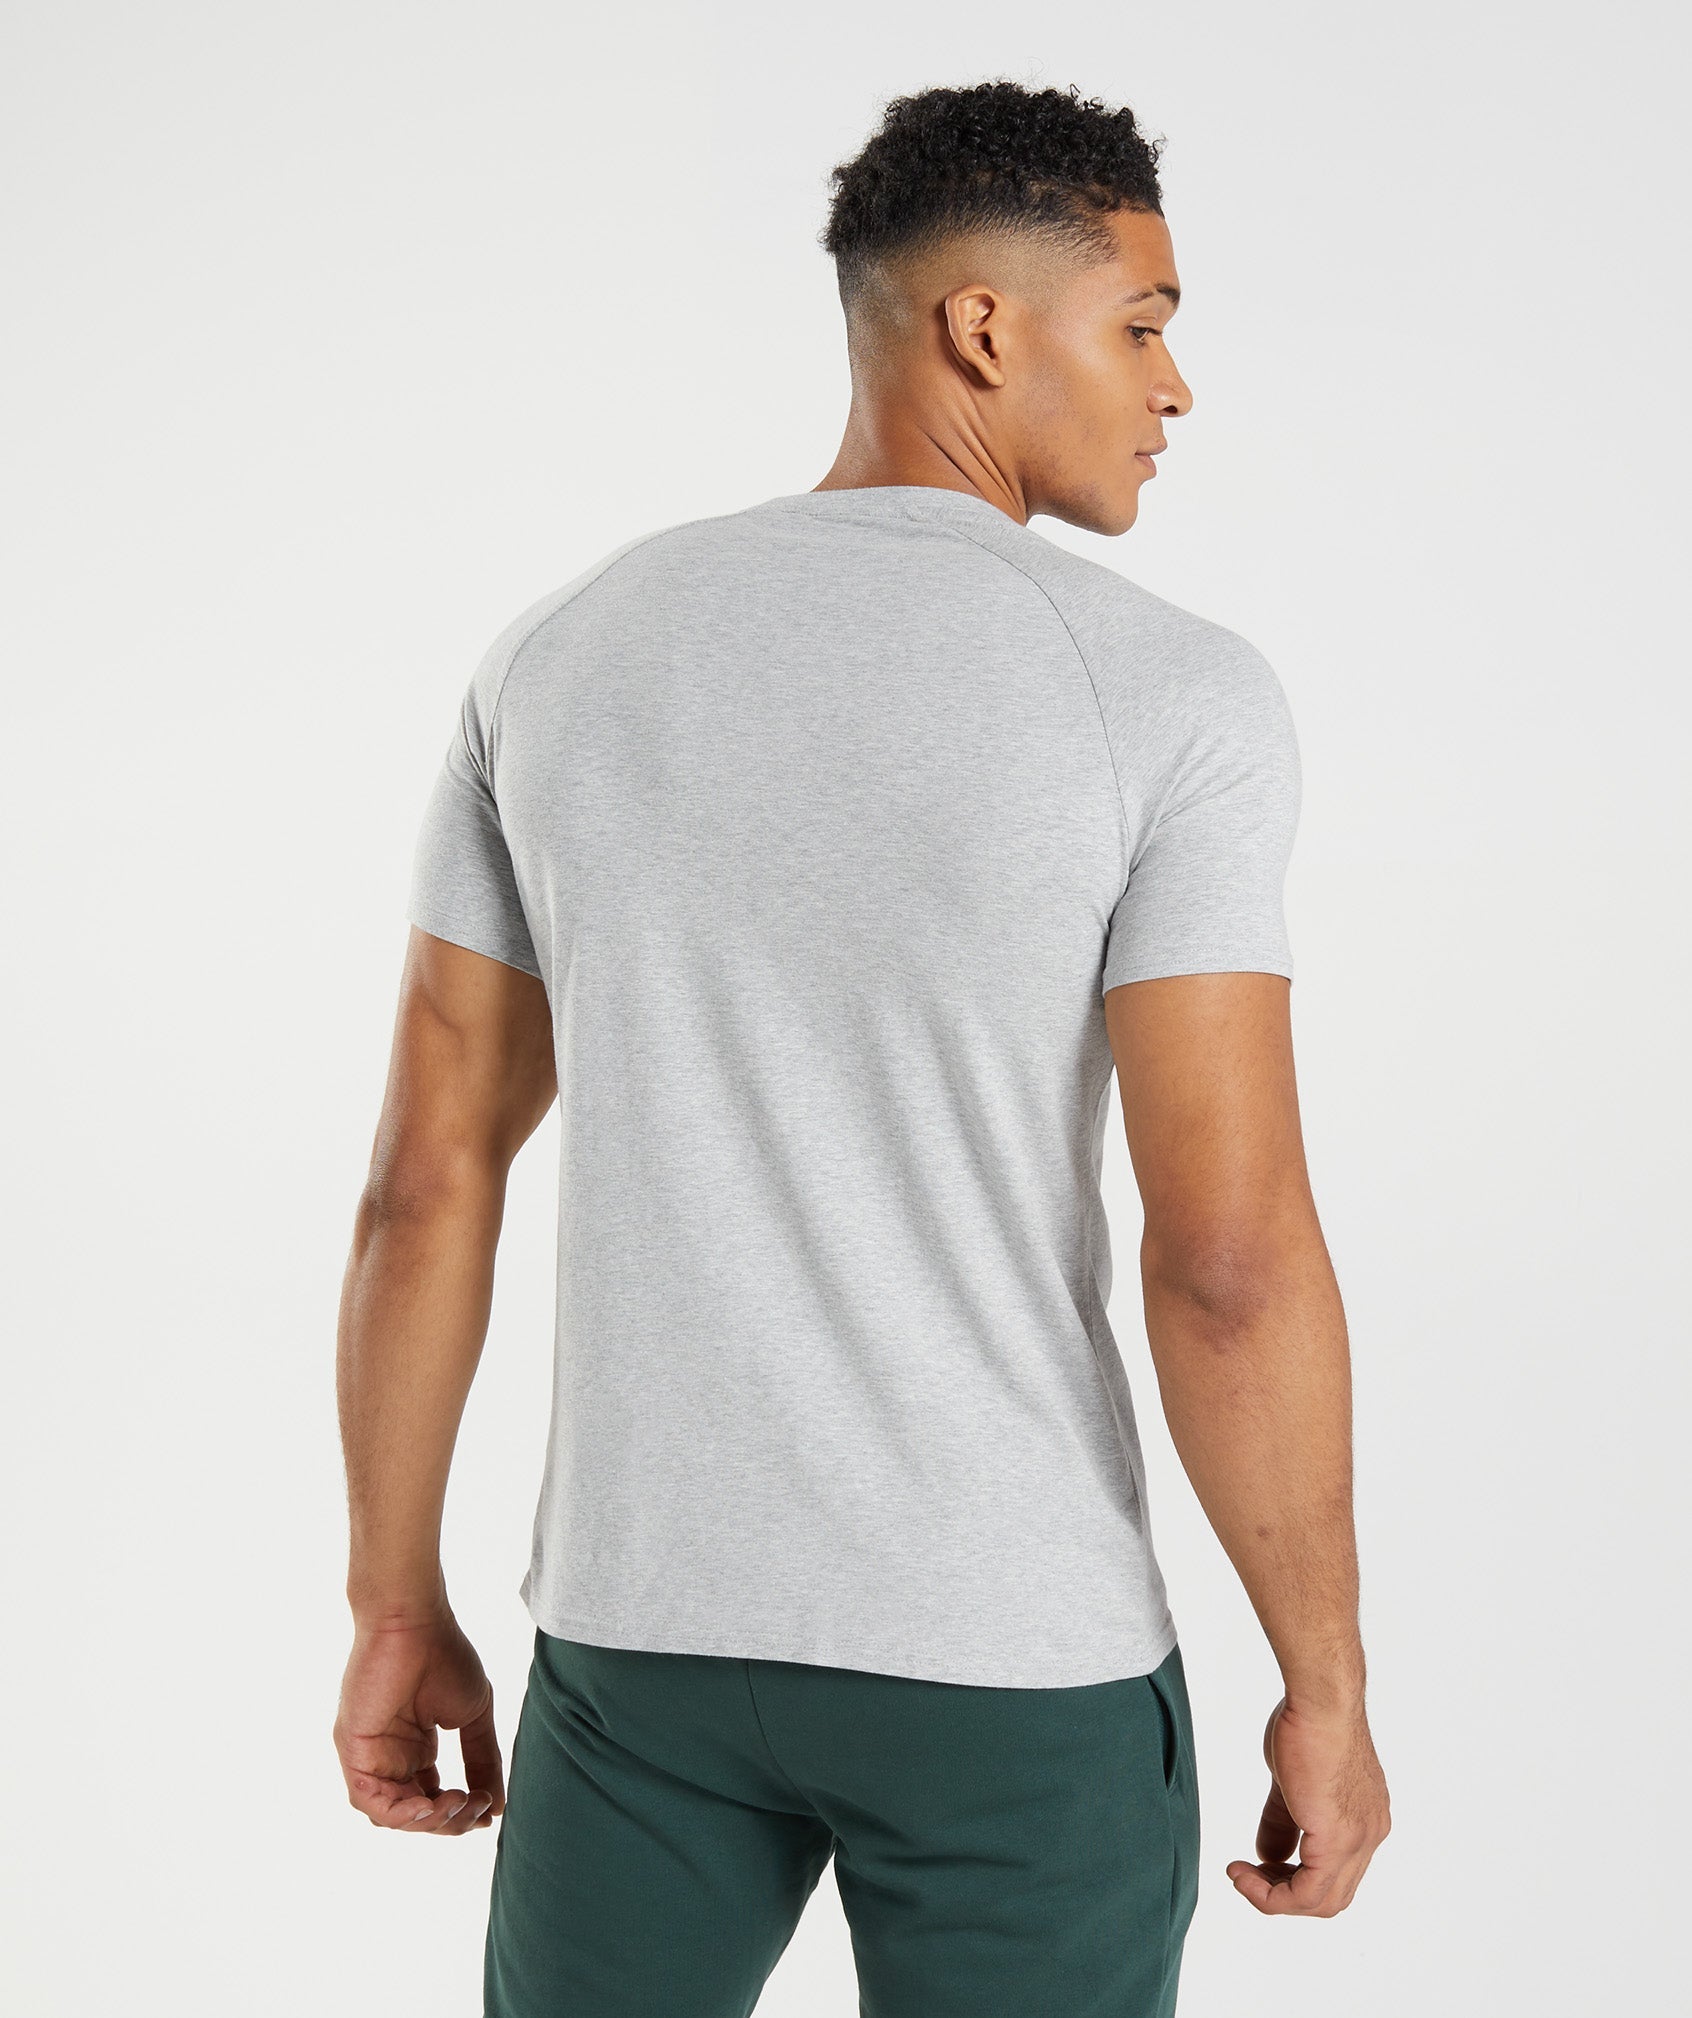 Apollo T-Shirt in Light Grey Marl - view 2